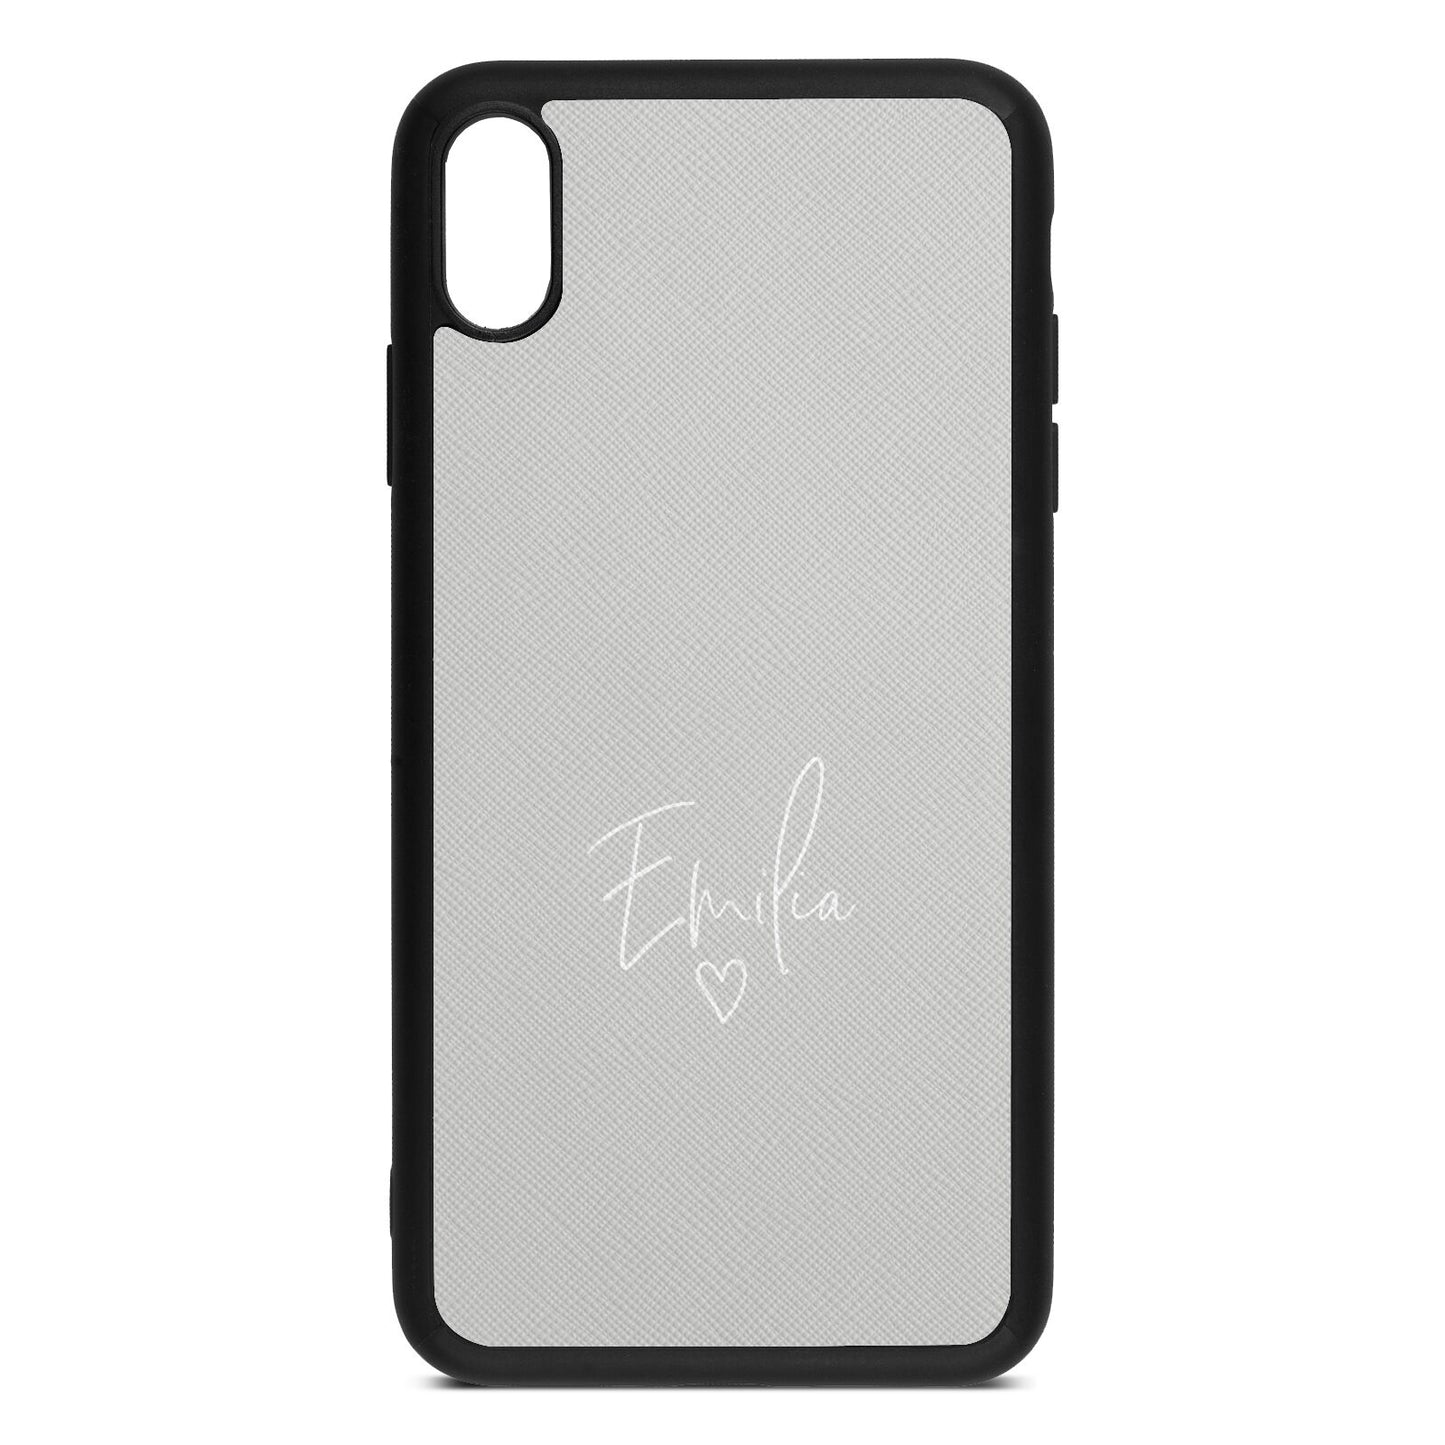 White Handwritten Name Transparent Silver Saffiano Leather iPhone Xs Max Case